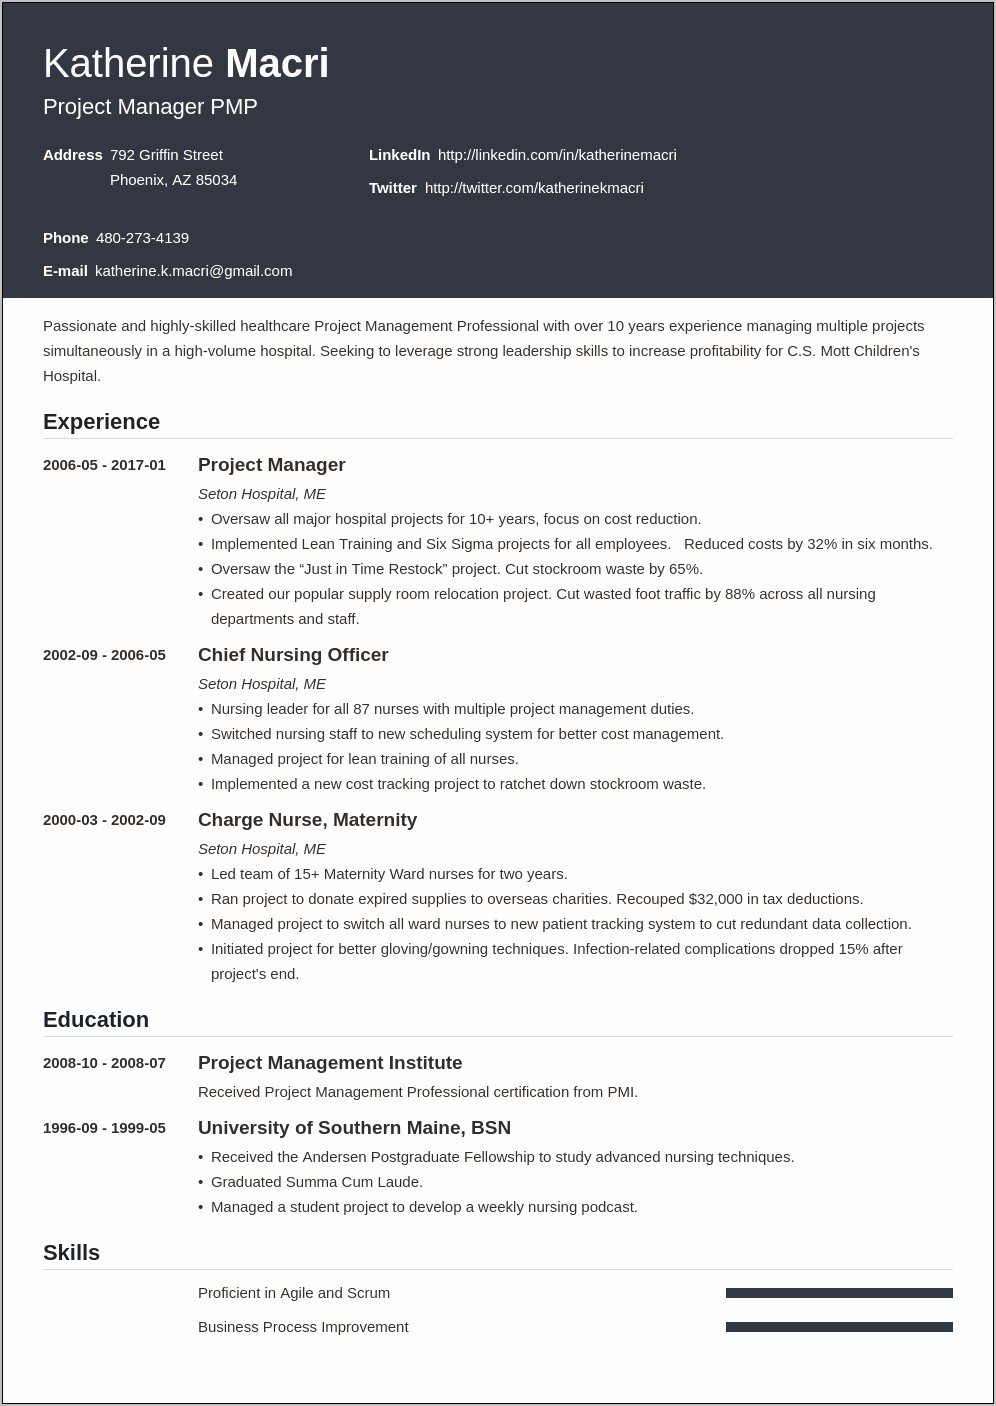 Quantify Cost System Manager Resume